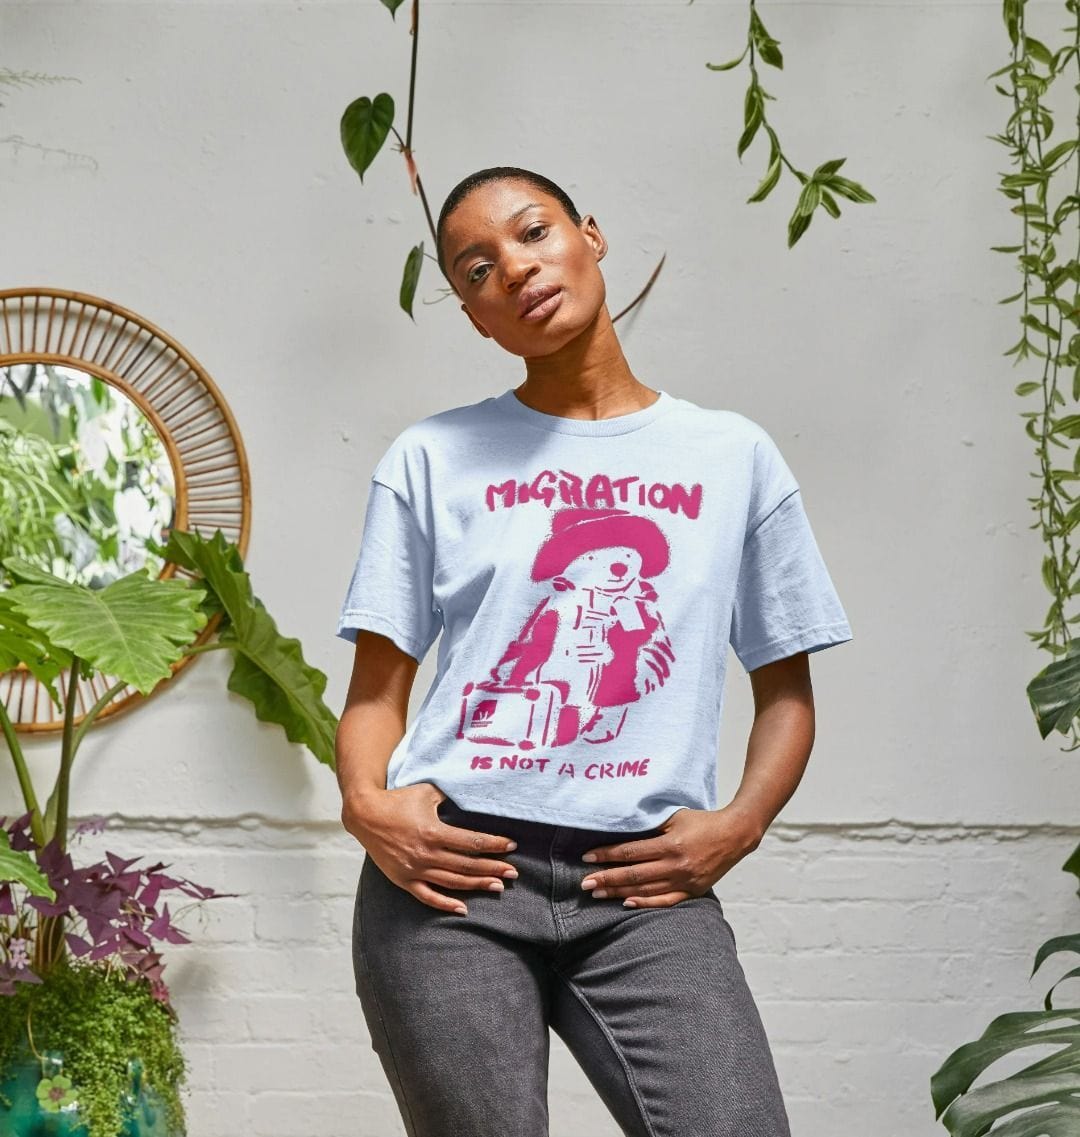 Migration Is Not a Crime - Organic Cotton Women's Boxy Tee